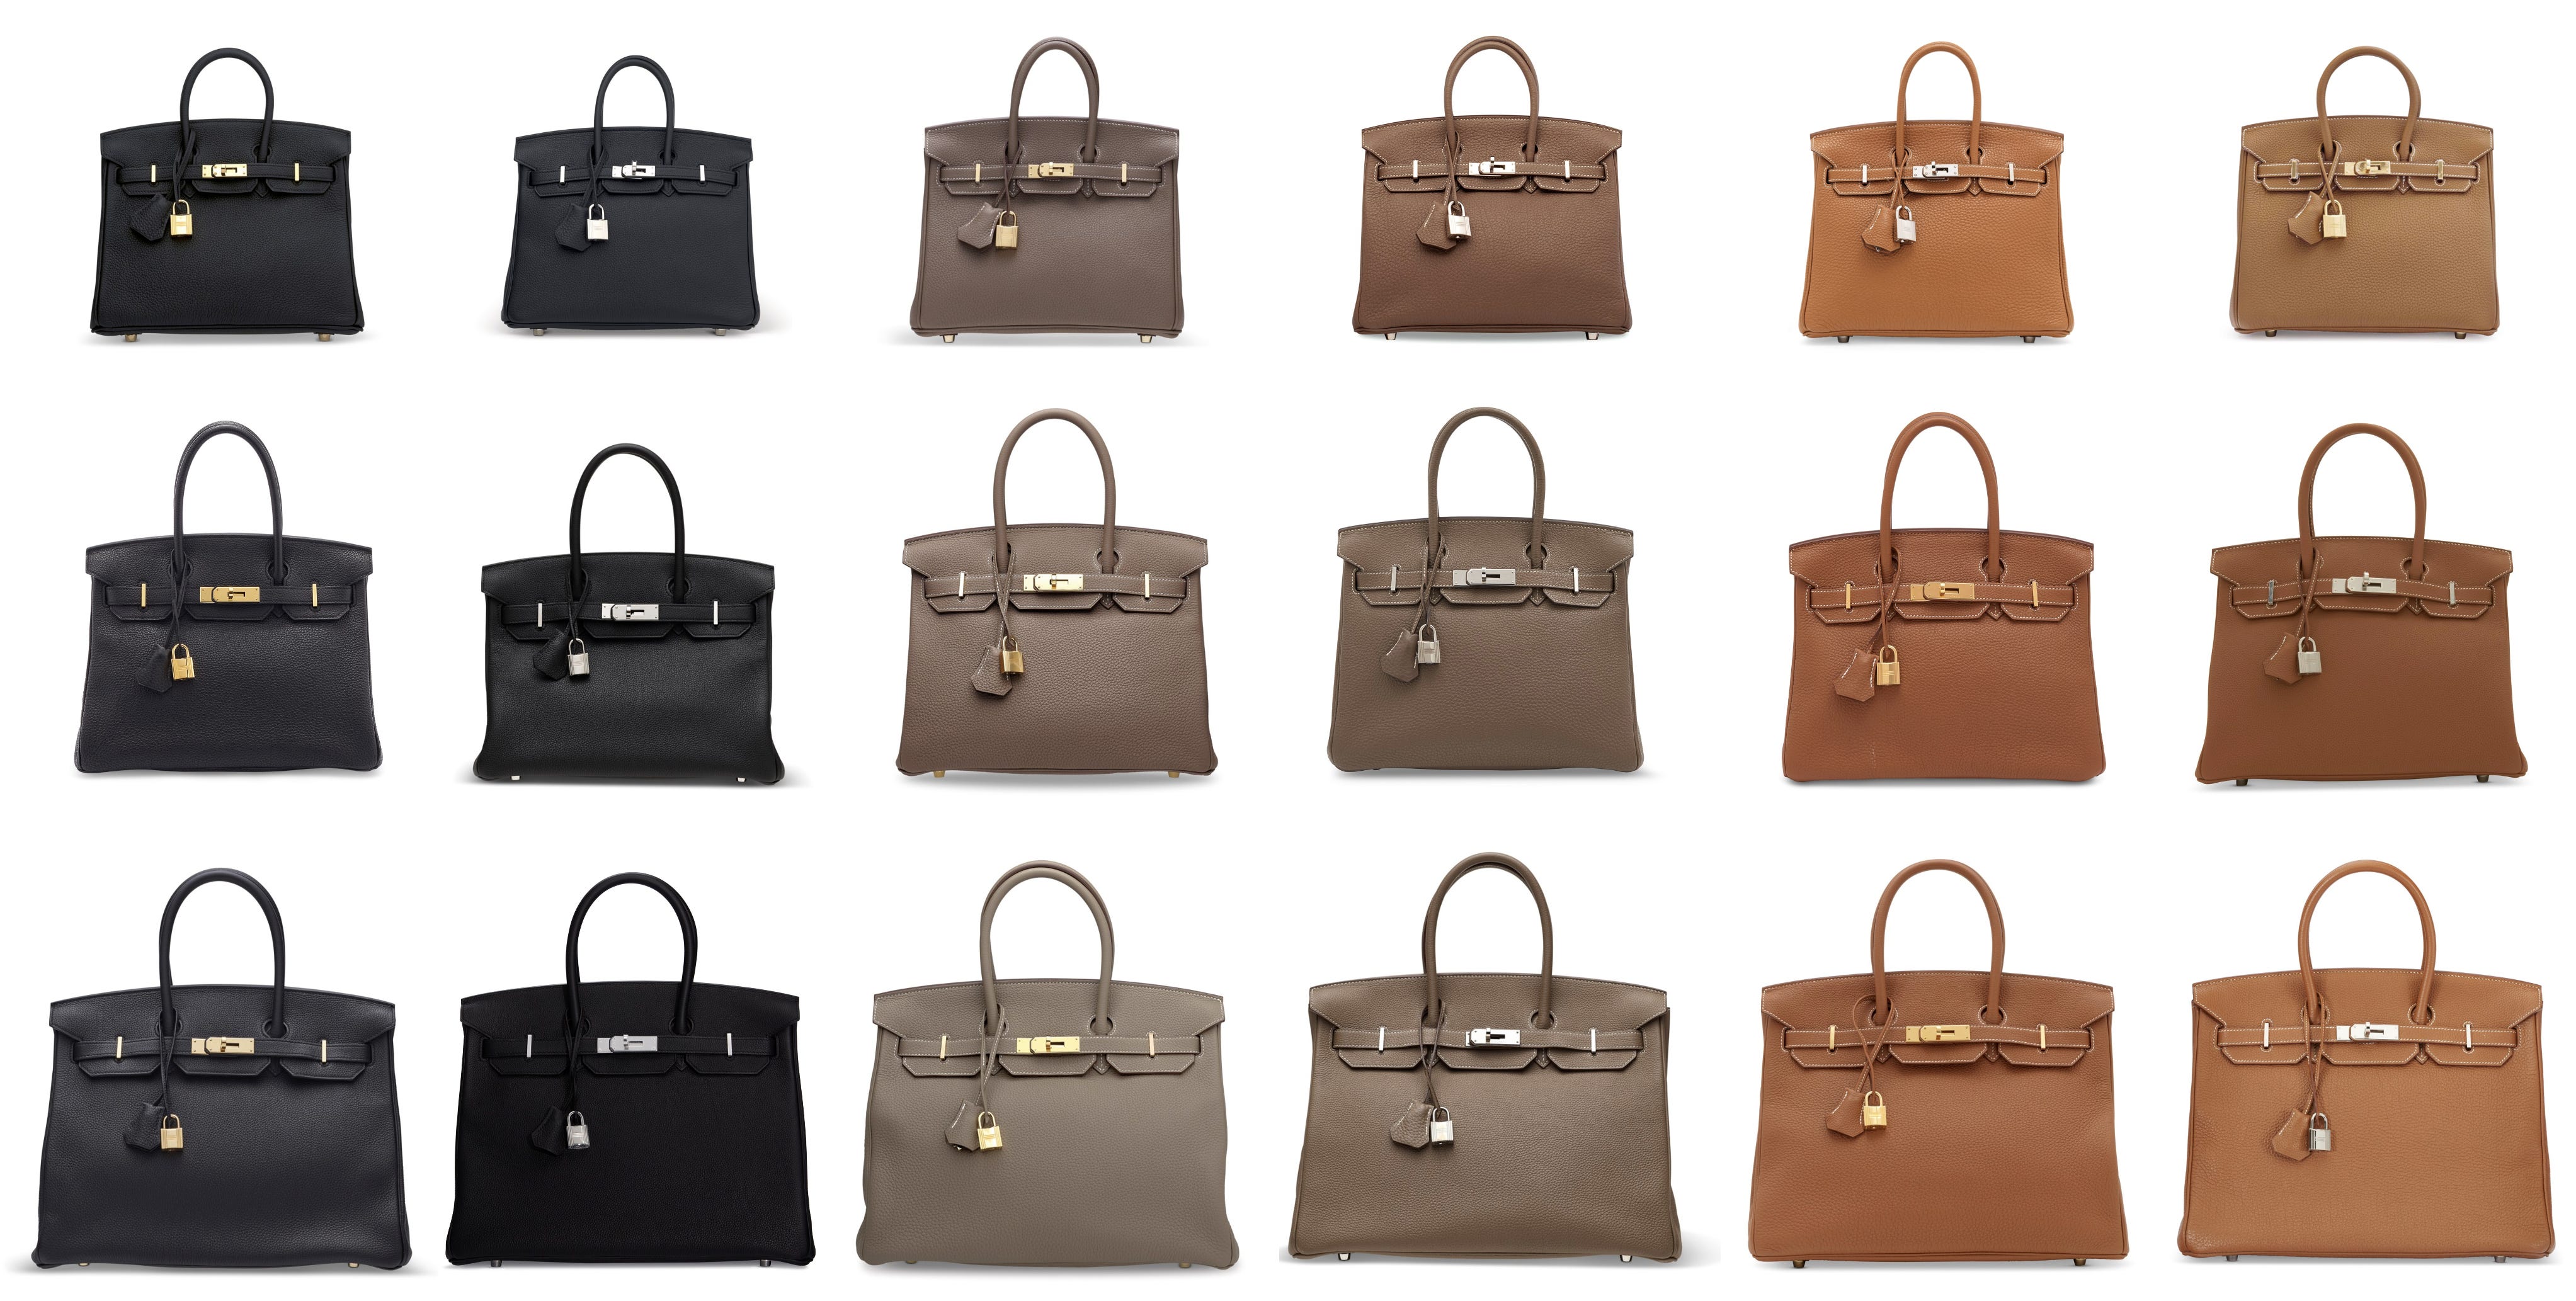 The Different Types Of Hermes Handbags